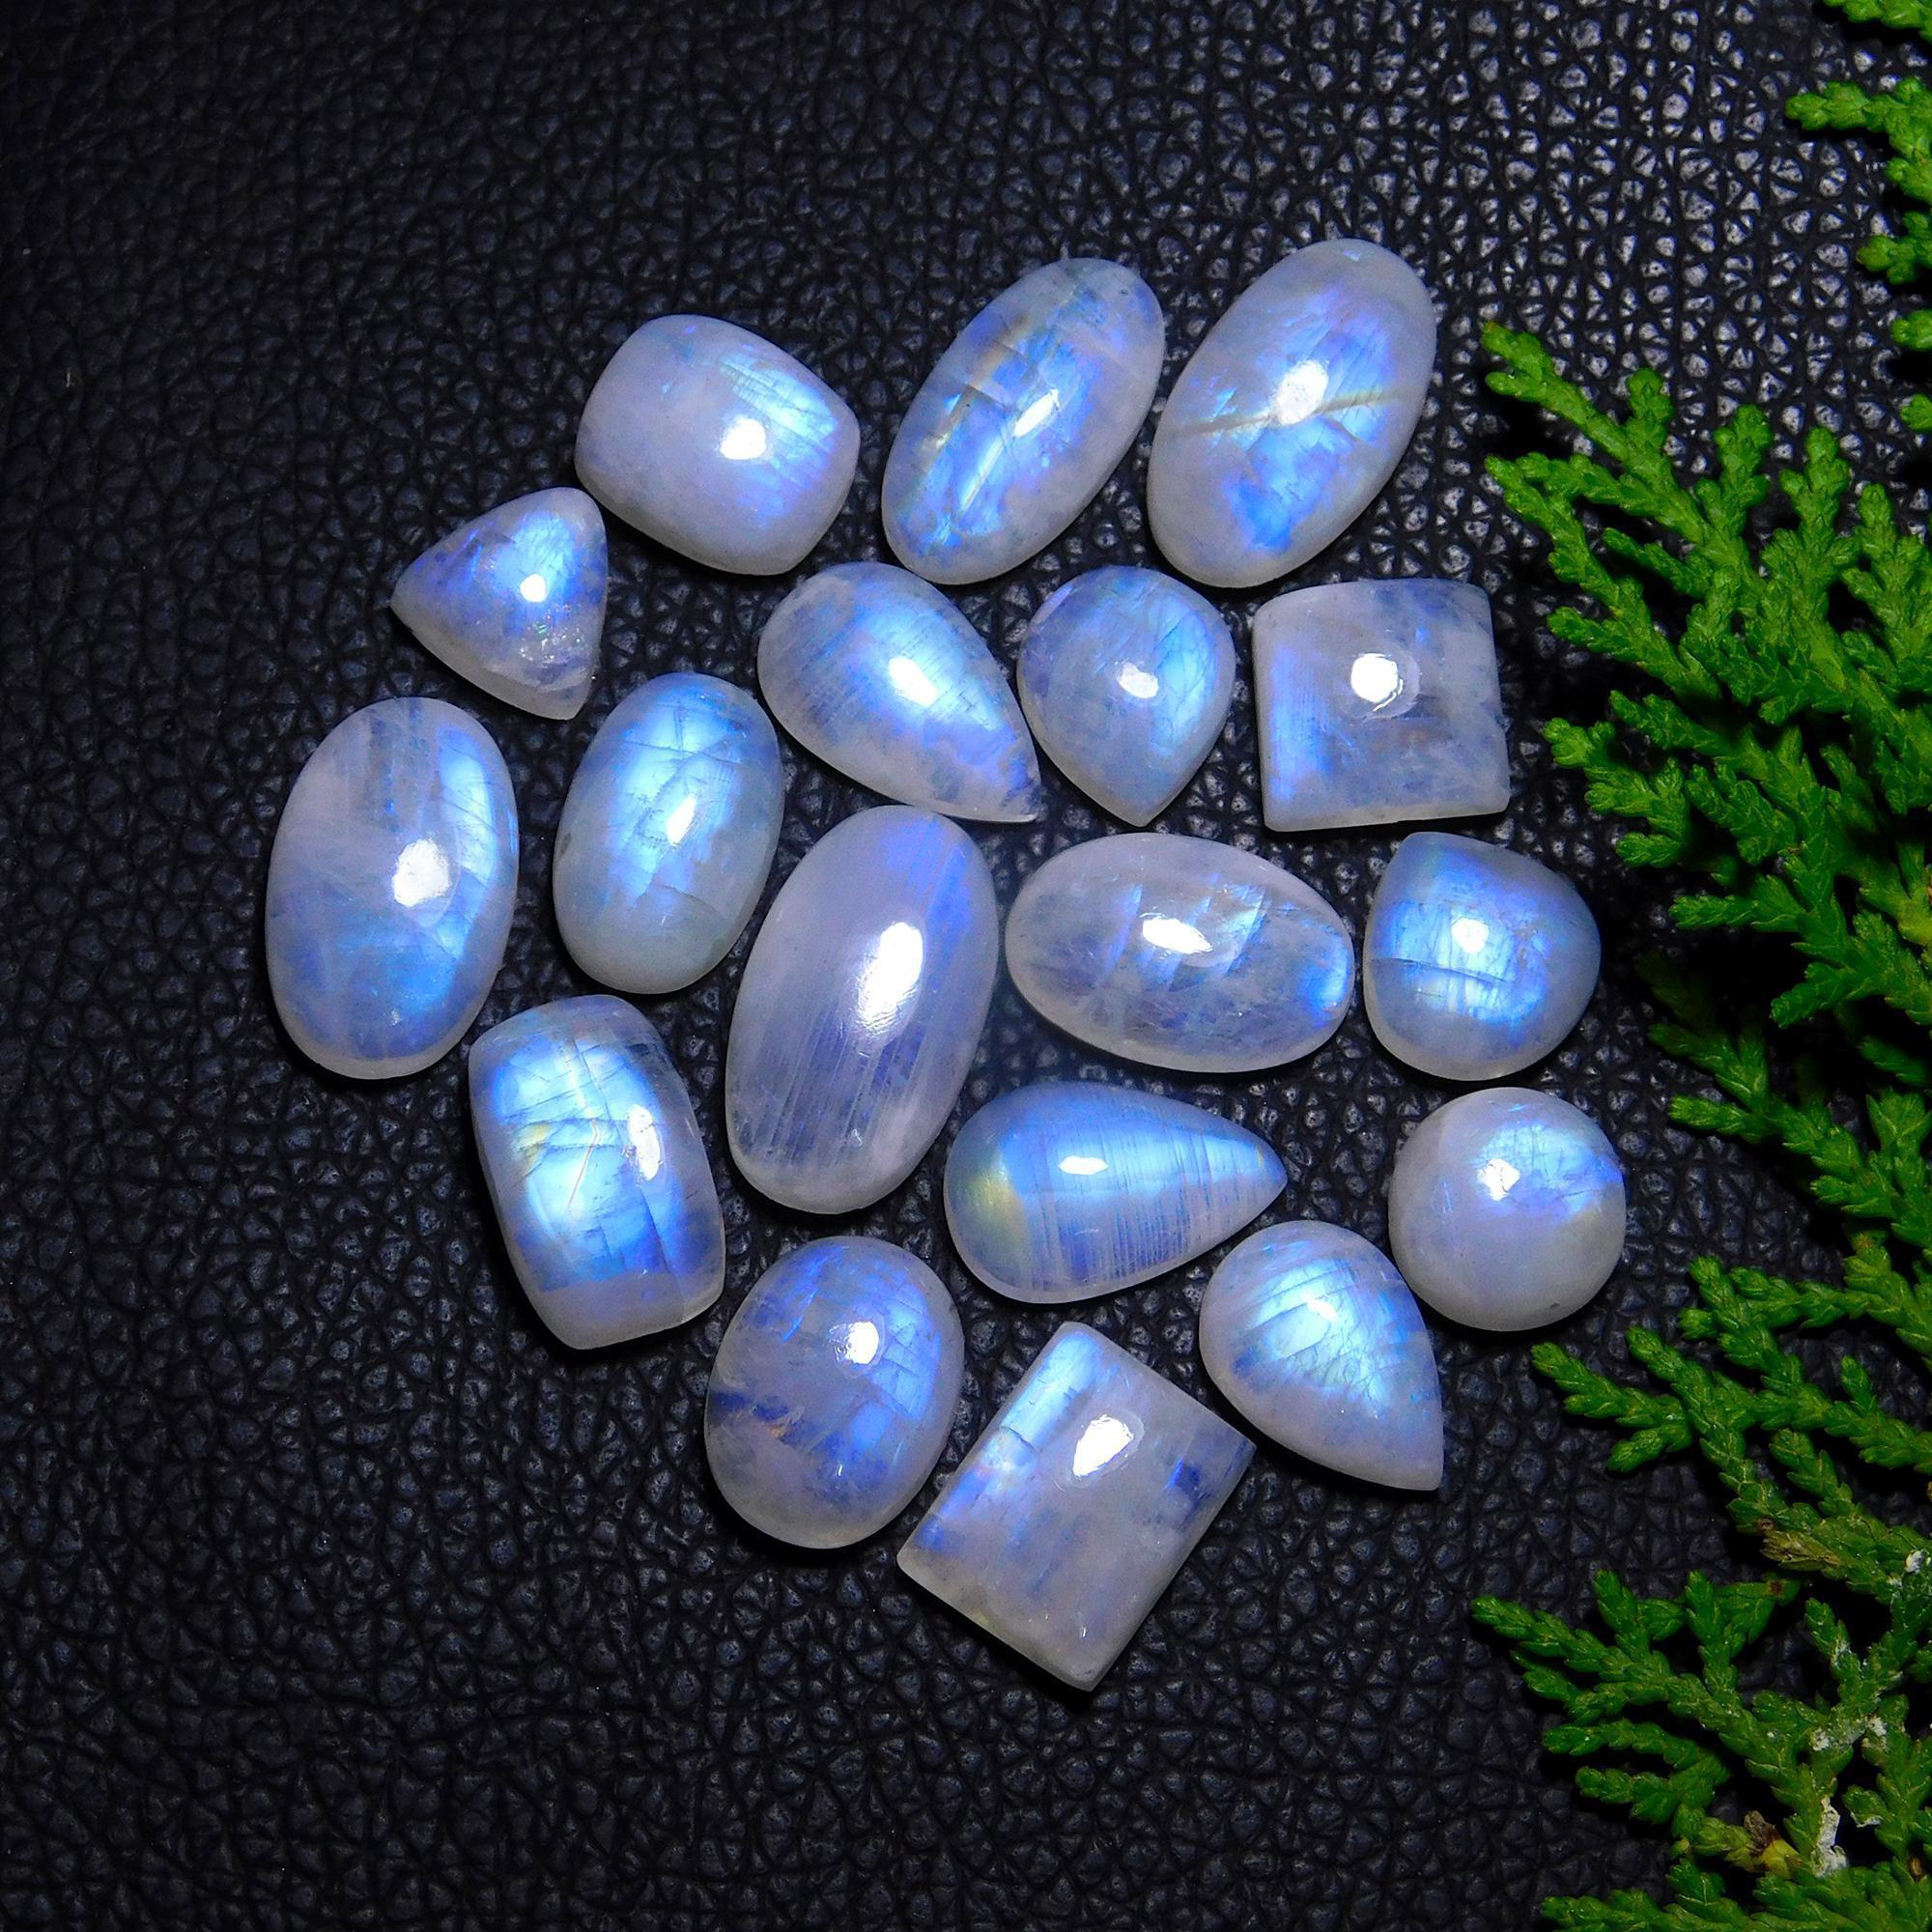 18Pcs 138Cts Natural Rainbow Moonstone Cabochon Blue Fire Loose Gemstone Crystal jewelry supplies wholesale lot gift for her Black Friday  18X10 12X12mm#9400